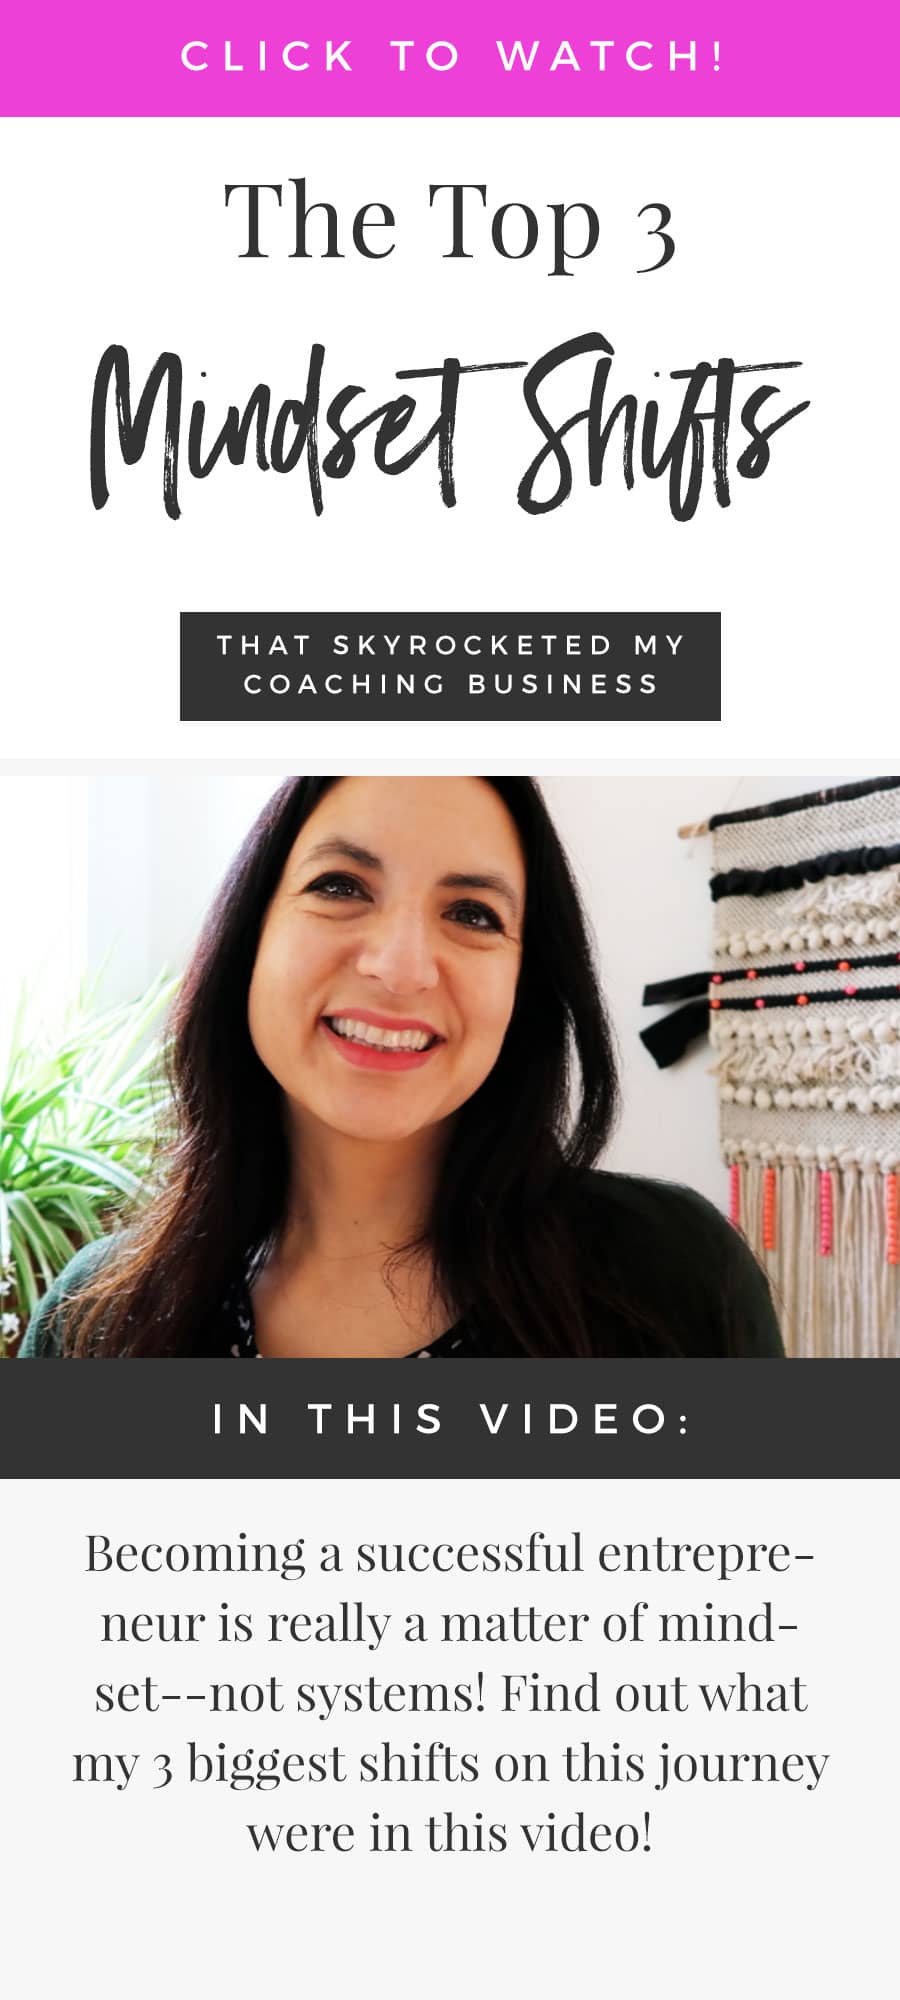 3 Mindset Shifts That Skyrocketed My Coaching Business